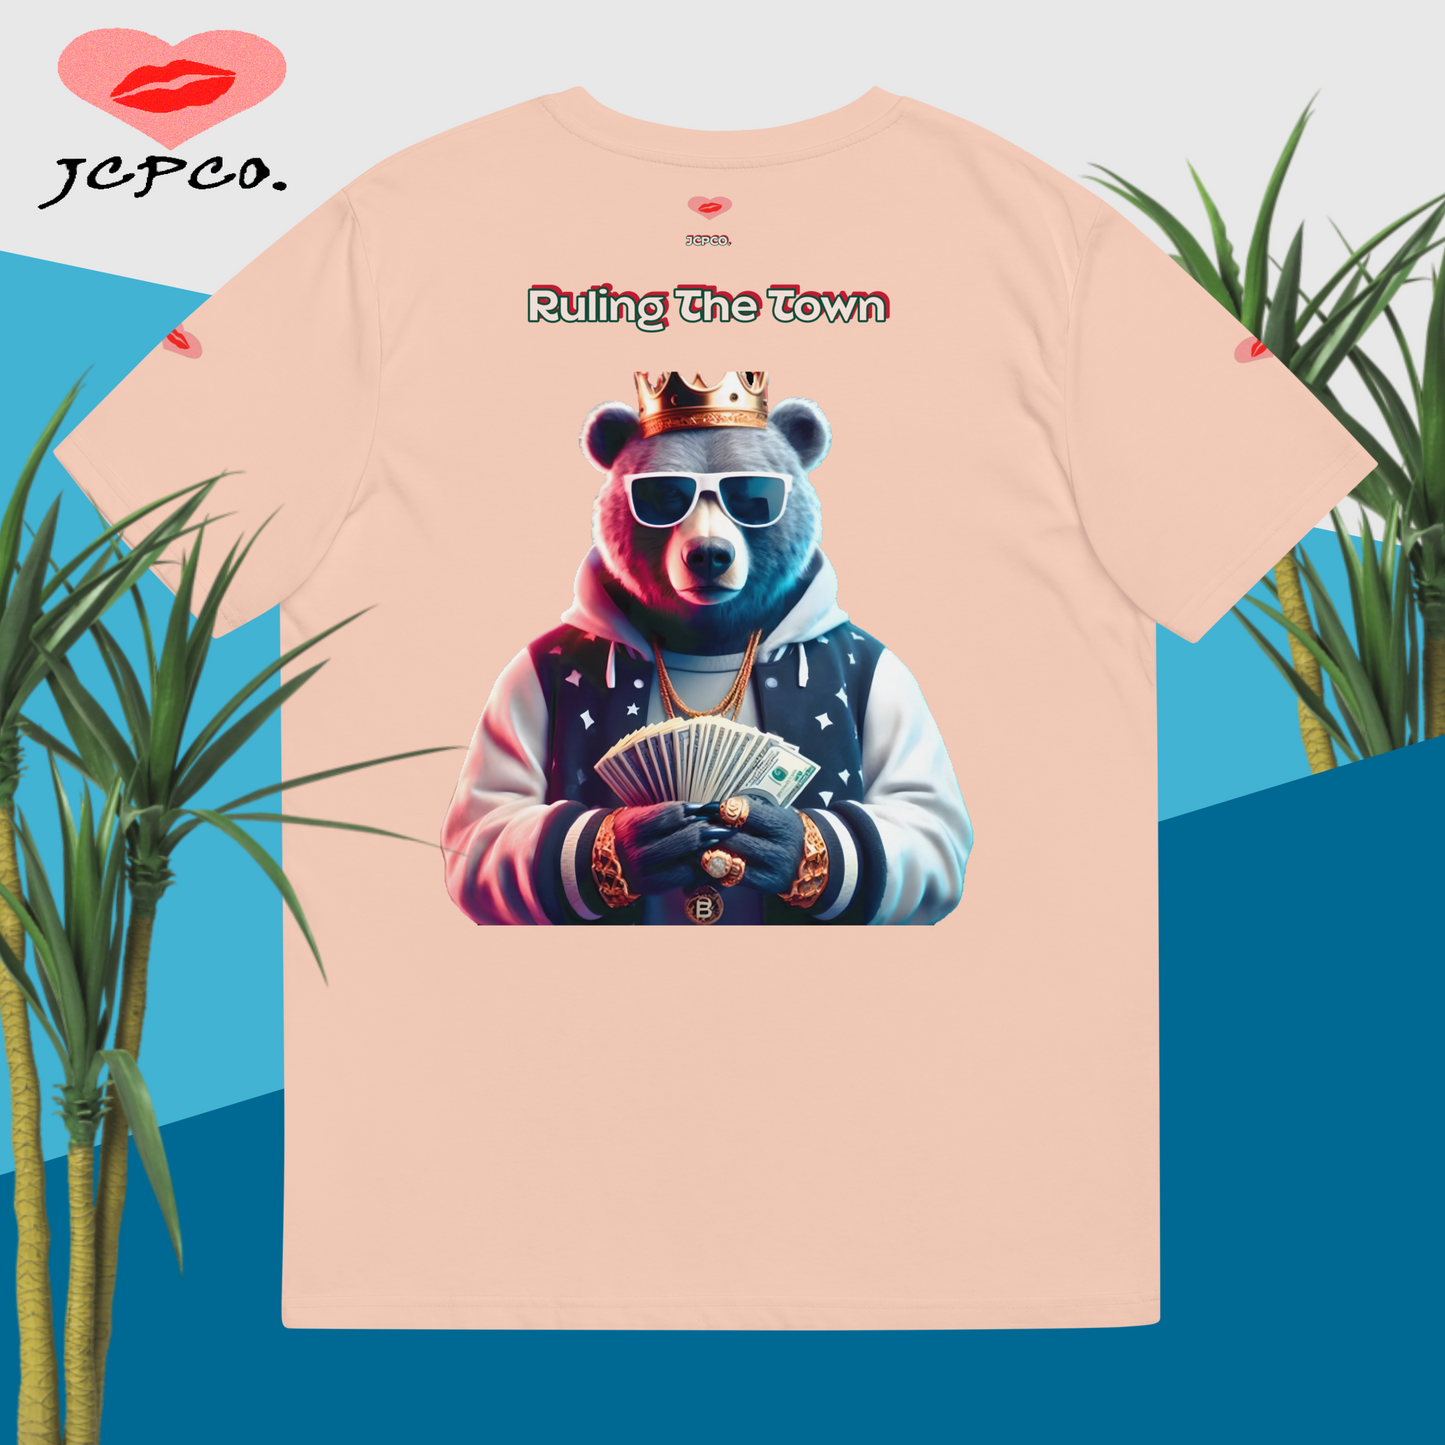 💕The Bear with Cash🐻💵 and a Crown Ruling the Town👑 Unisex organic cotton T-shirt👕